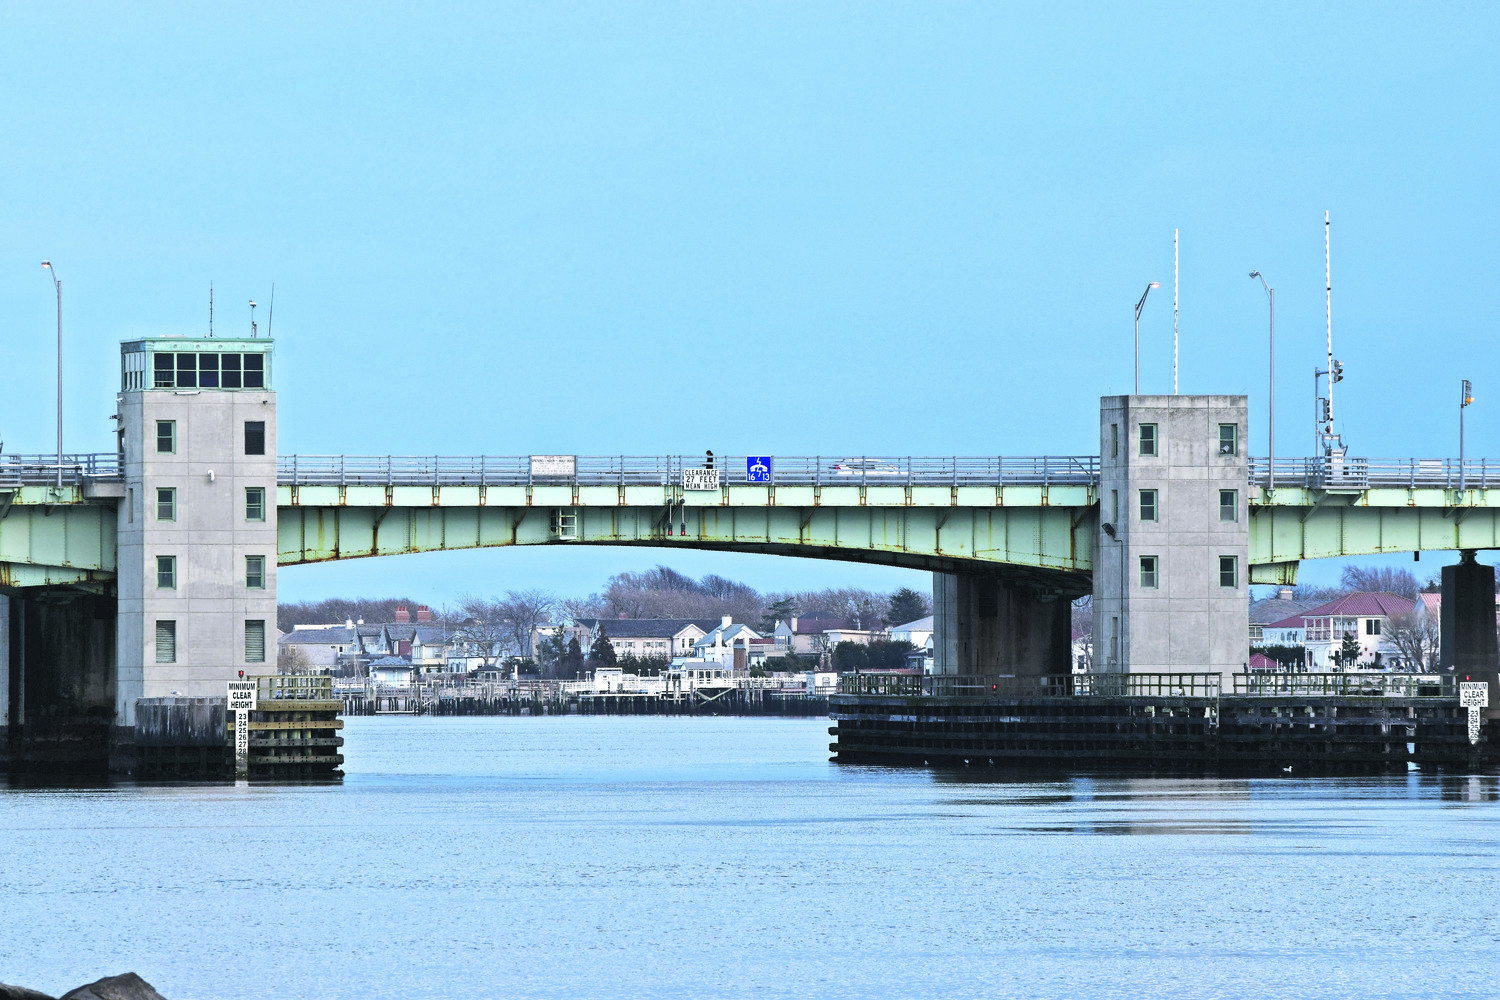 Tolls for the Atlantic Beach Bridge — the only bridge in Nassau County that costs money to cross — will increase from $2 to $3 on Jan. 1, and later next year, vehicles that are not registered in Nassau County will be charged $4.